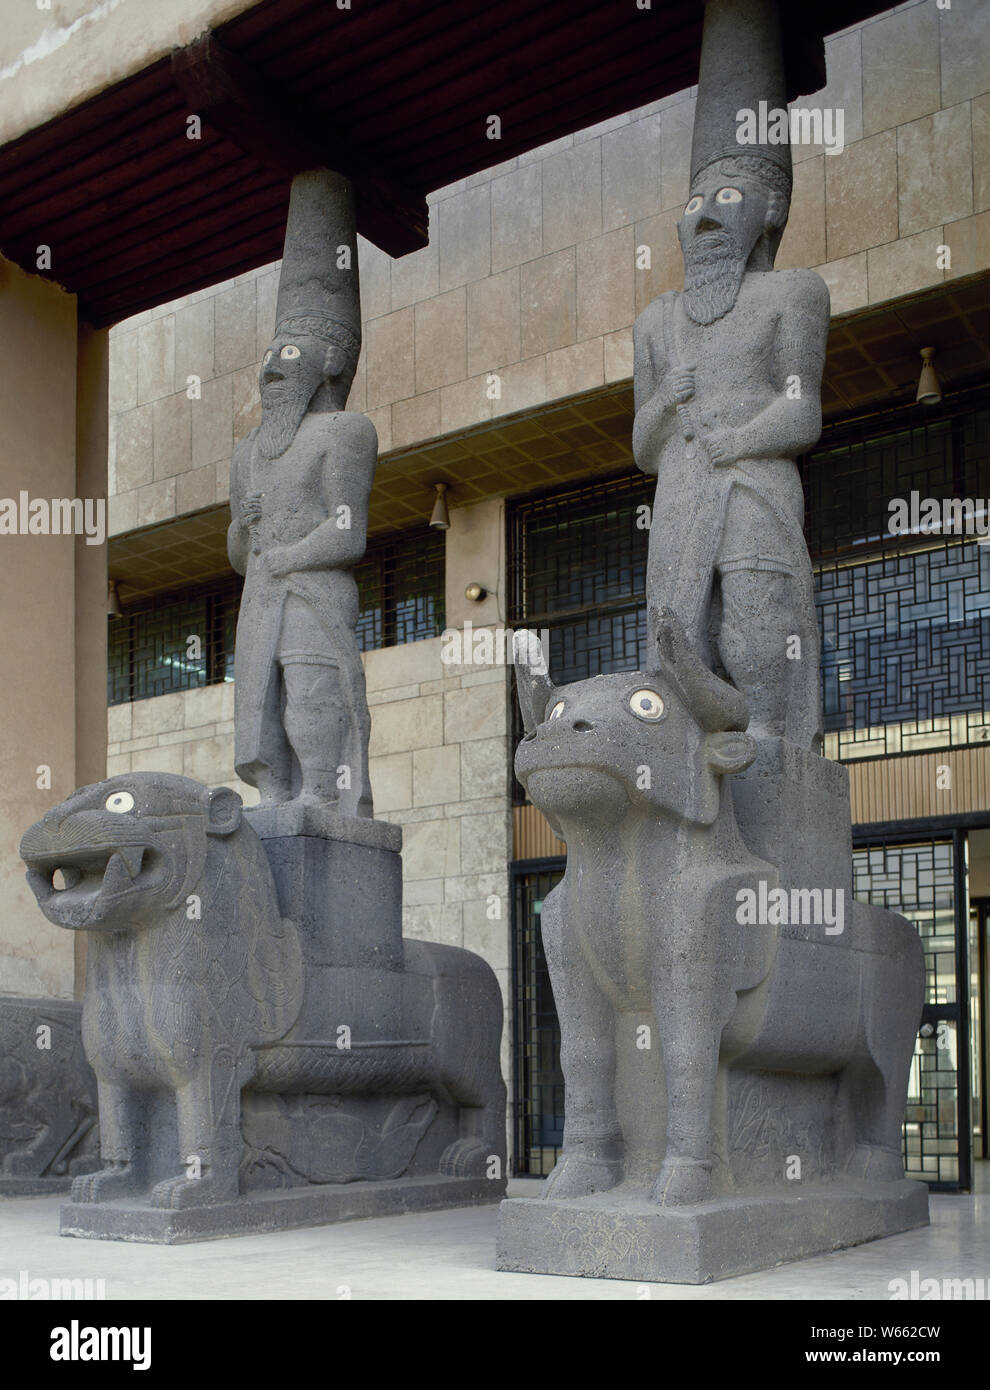 Eastern Mediterranean Civilization. Syria. Halaf Culture (6100-5100 BC). Iron Age Neo-Hittite Settlement of Tell Halaf. Caryatids and sculptures of basalt, which guarded the Tell Halaf Temple, placed at the entrance of the National Museum of Aleppo. (Picture taken before the civil war). Stock Photo